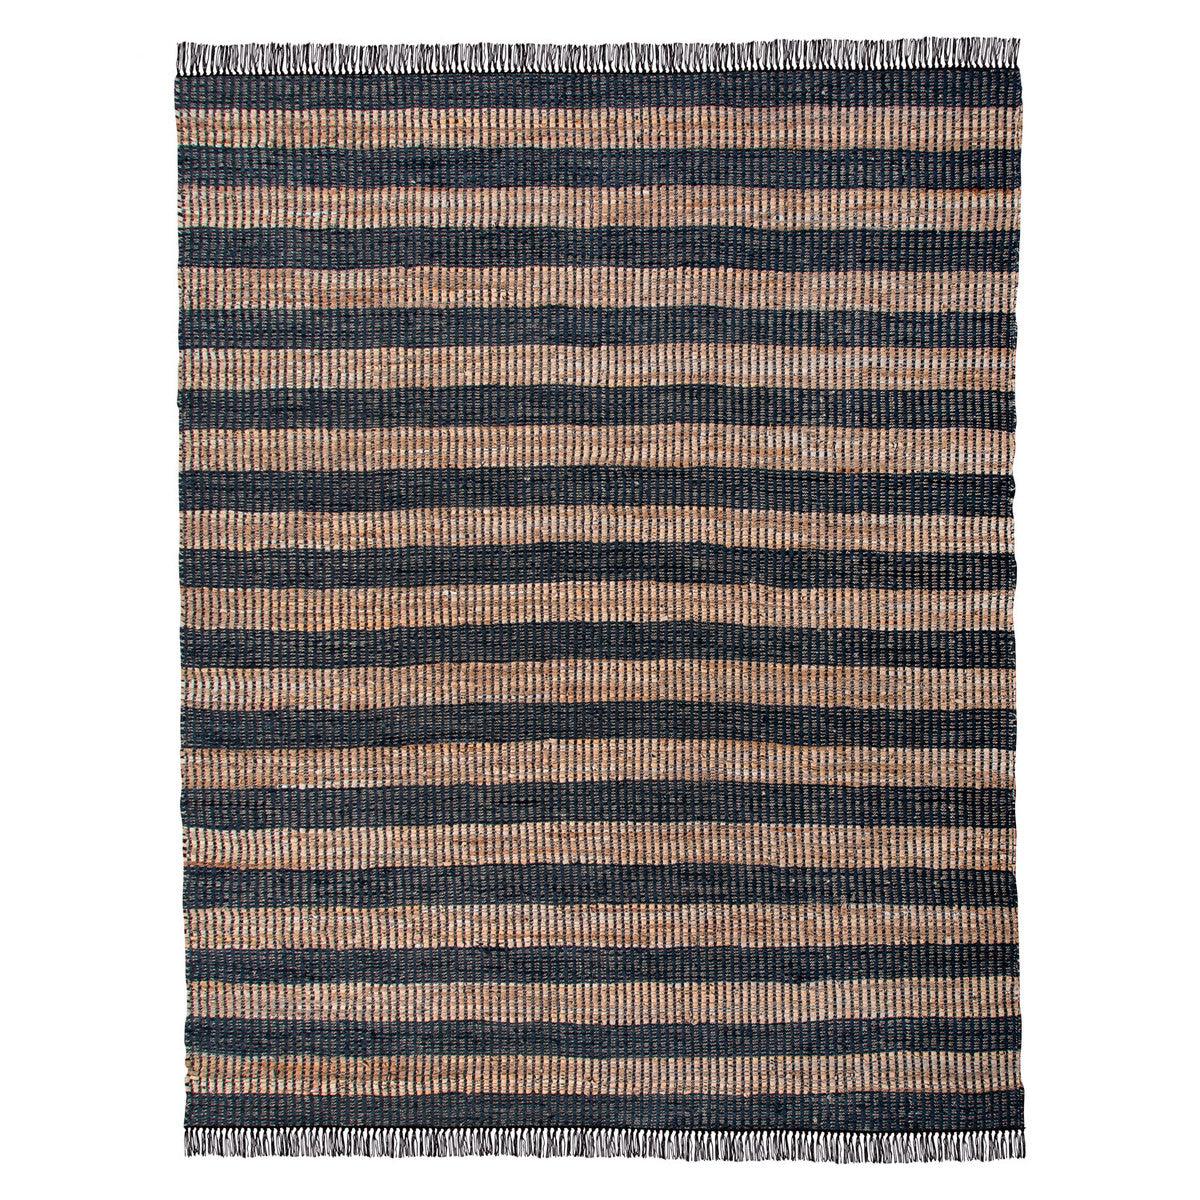 Leather and Hemp Woven Rug, 7'9" x 9'9" - Signastyle Boutique